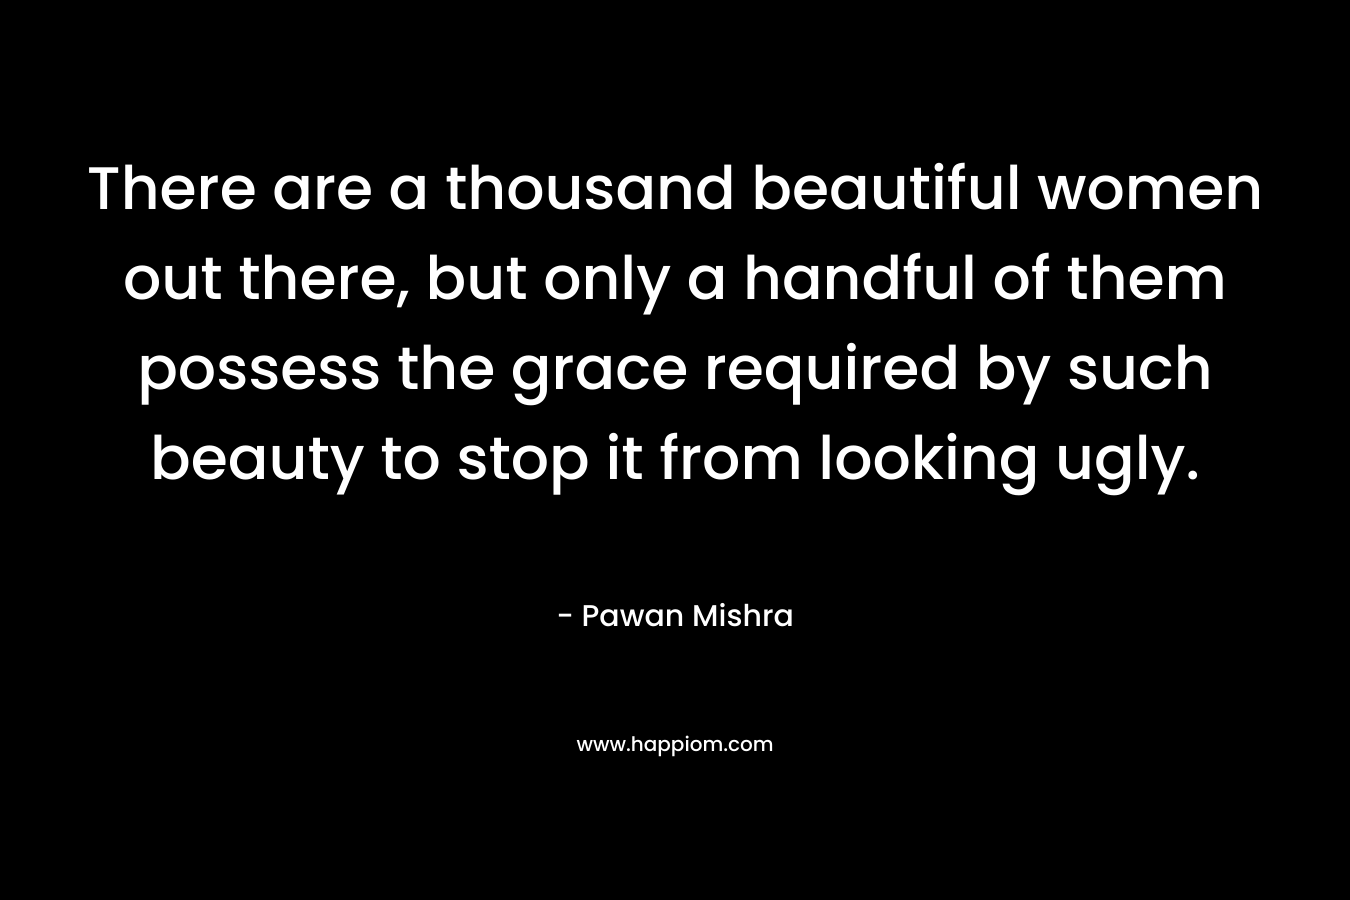 There are a thousand beautiful women out there, but only a handful of them possess the grace required by such beauty to stop it from looking ugly.